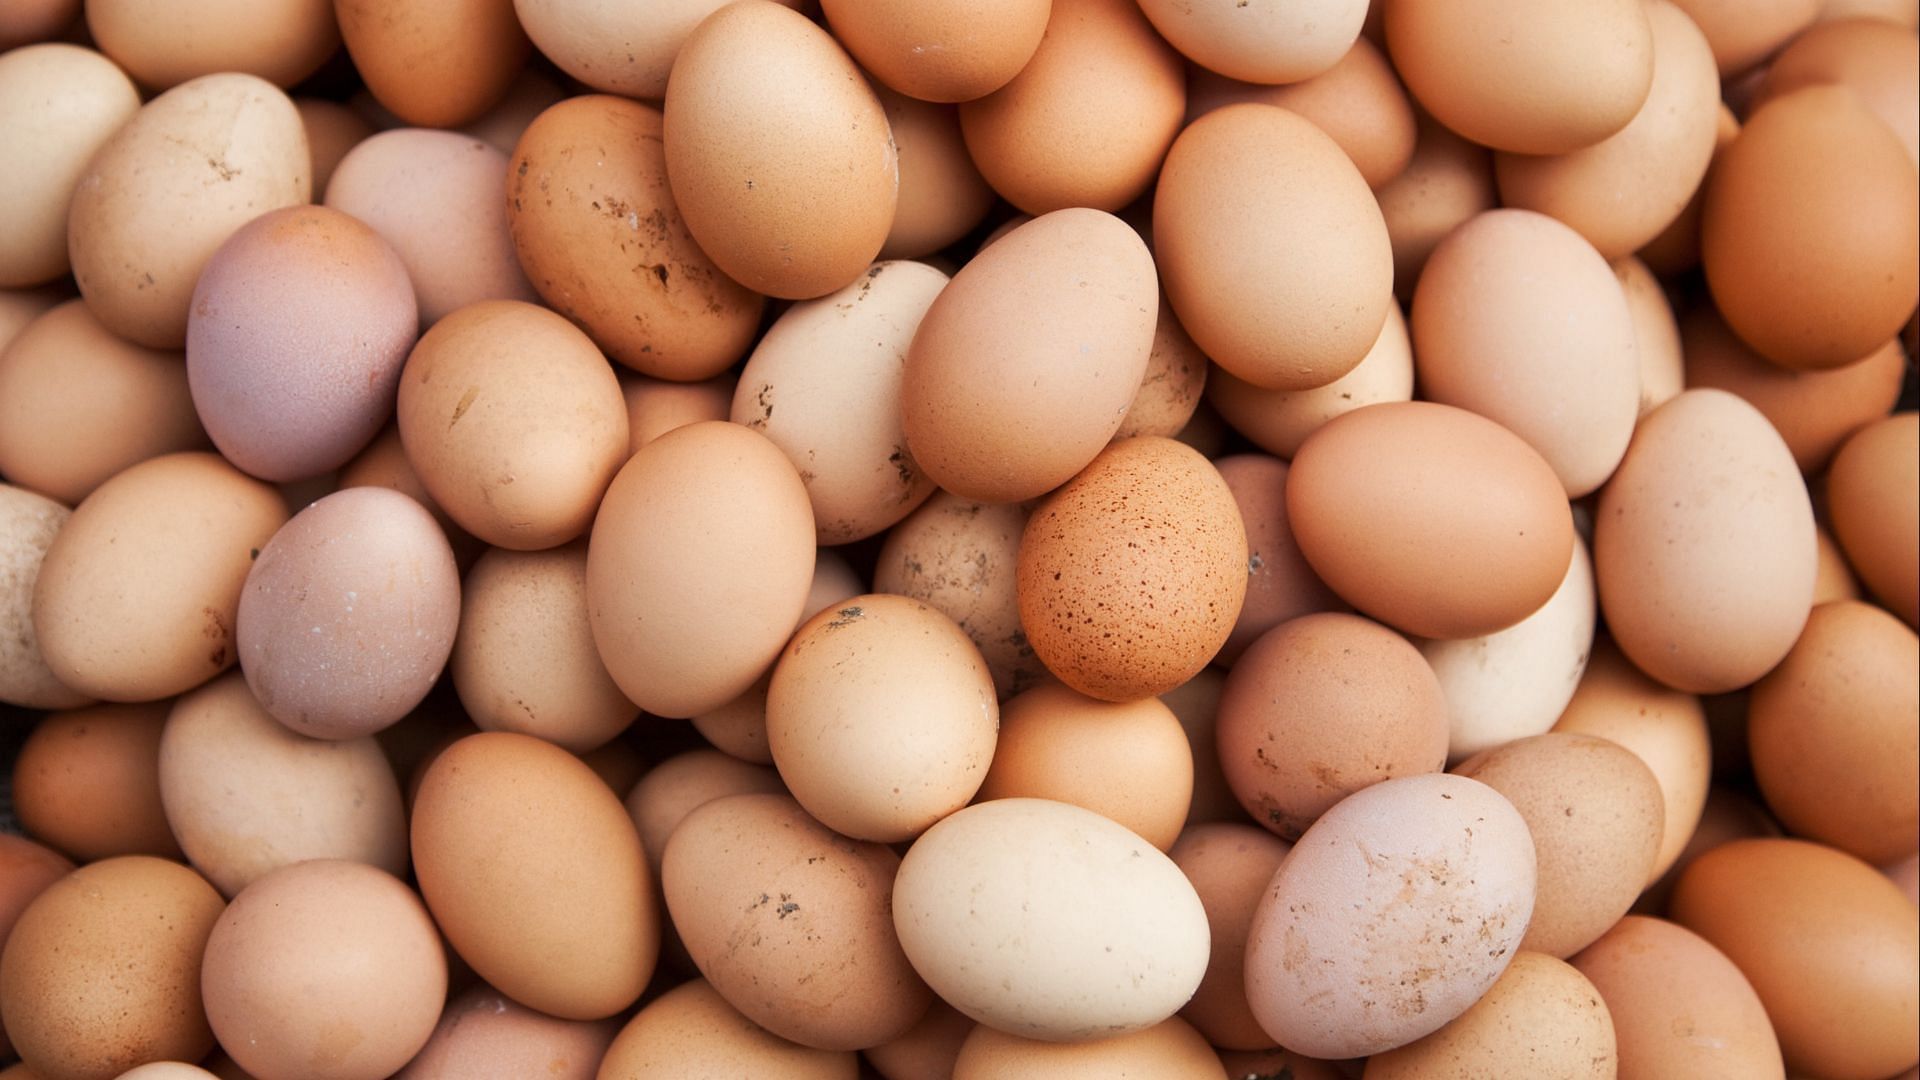 all Dollar Tree stores across the country will stop selling eggs in the coming days and/or weeks (Image via Nikada/Getty Images)